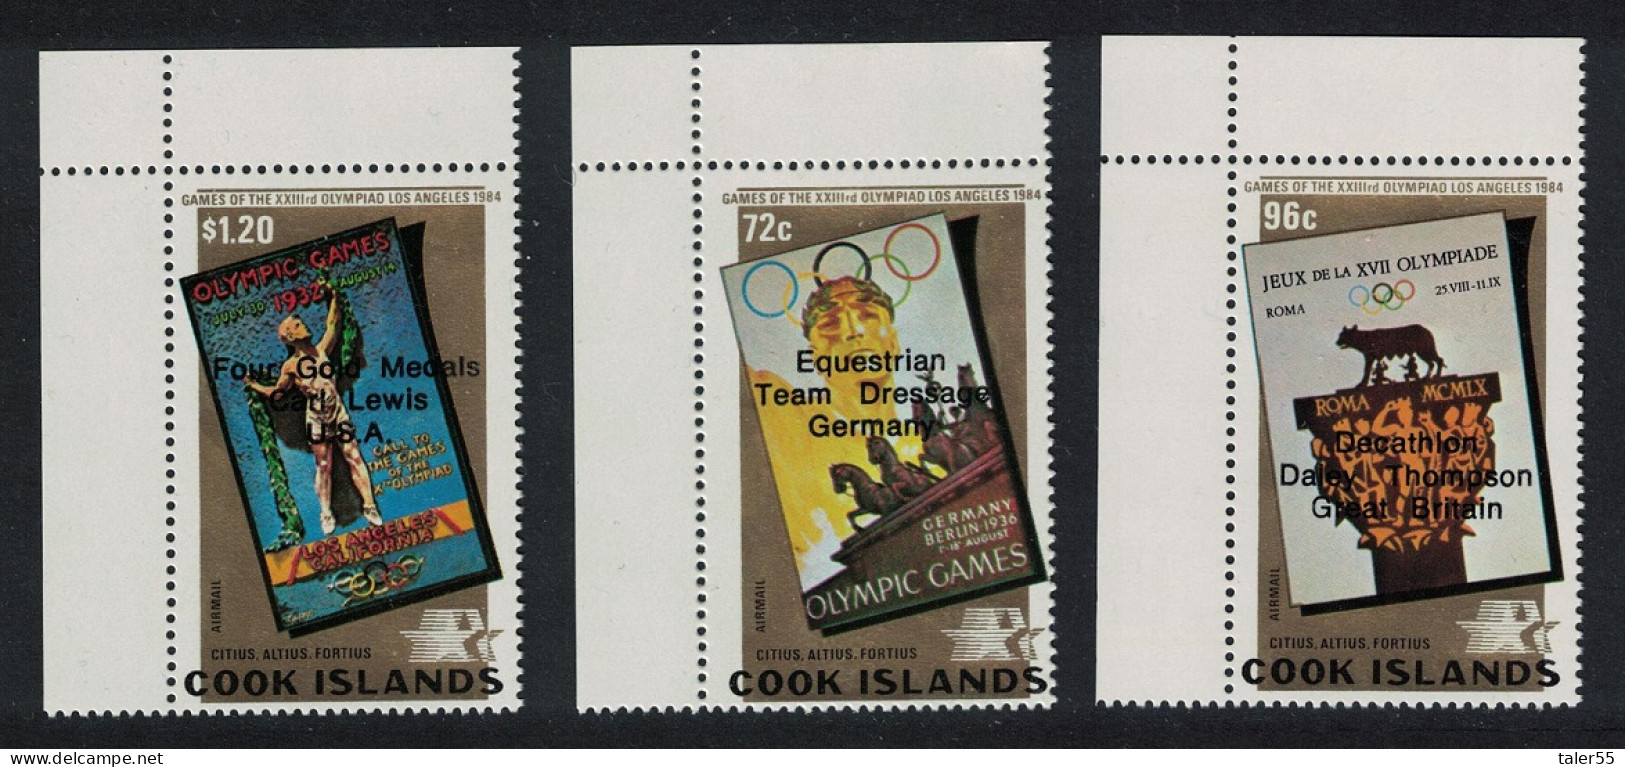 Cook Is. Olympic Gold Medal Winners Corners 1984 MNH SG#995-997 - Cook